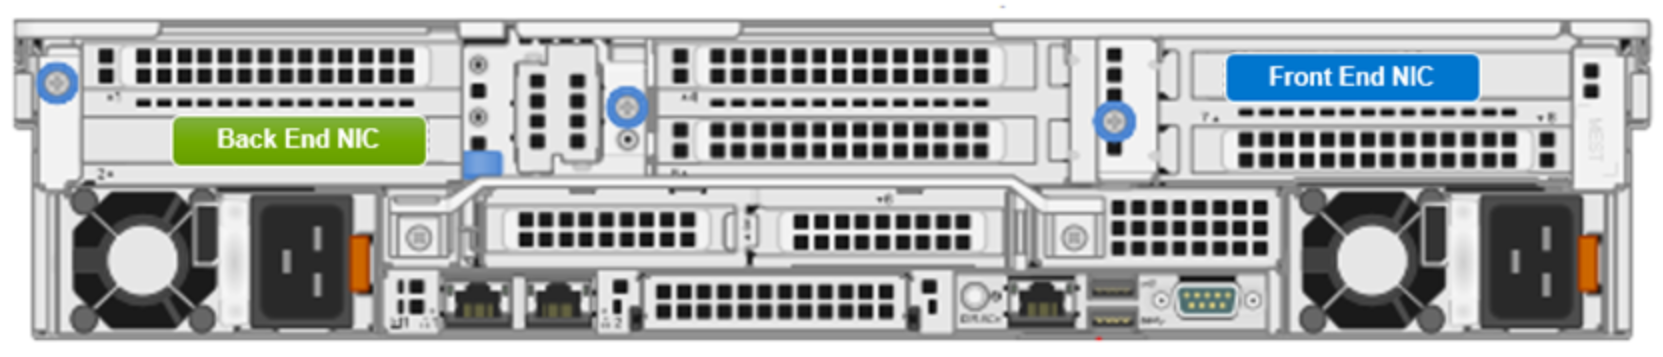 A diagram depicting the rear view highlighting the internal back-end and front-end NIC ports for the F910 node.